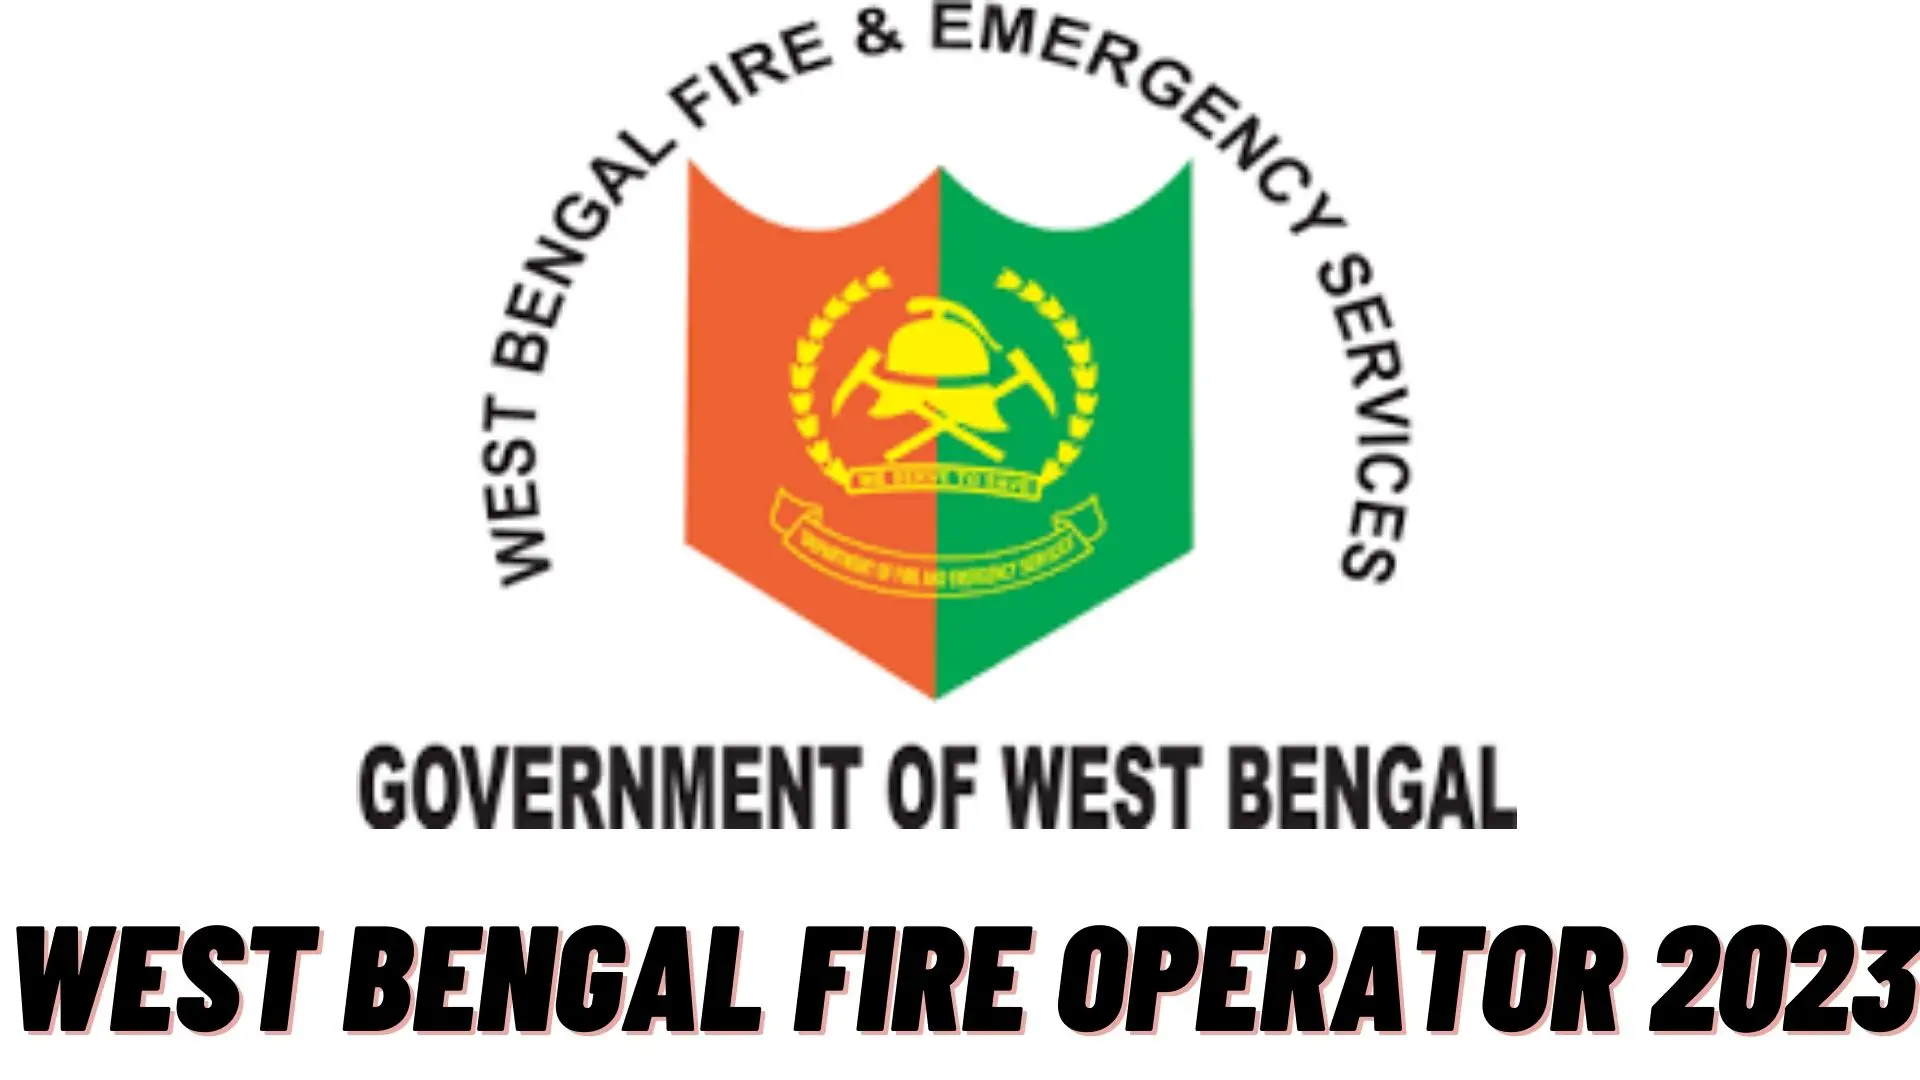 West Bengal Fire Operator 2023